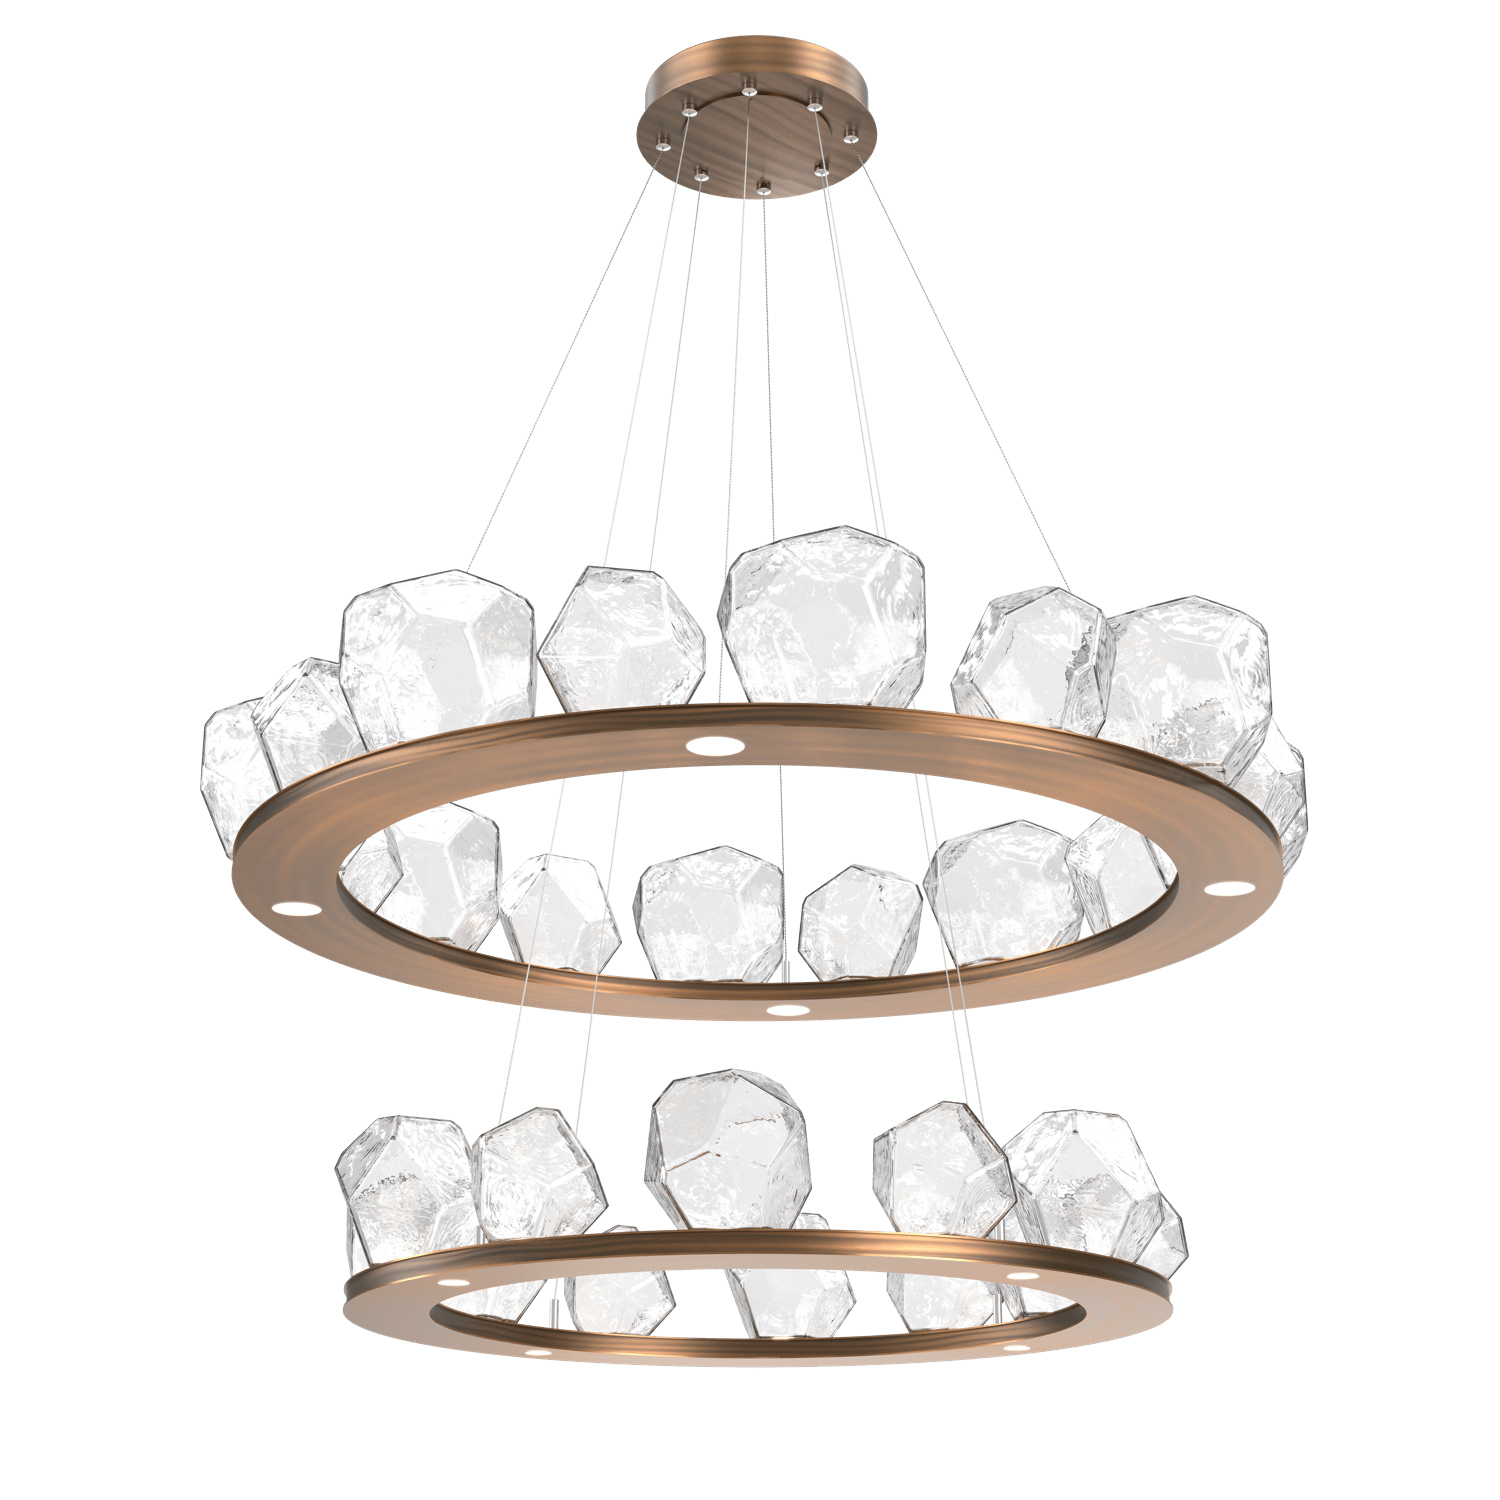 CHB0039-2B-RB-C-Hammerton-Studio-Gem-48-inch-two-tier-ring-chandelier-with-oil-rubbed-bronze-finish-and-clear-blown-glass-shades-and-LED-lamping